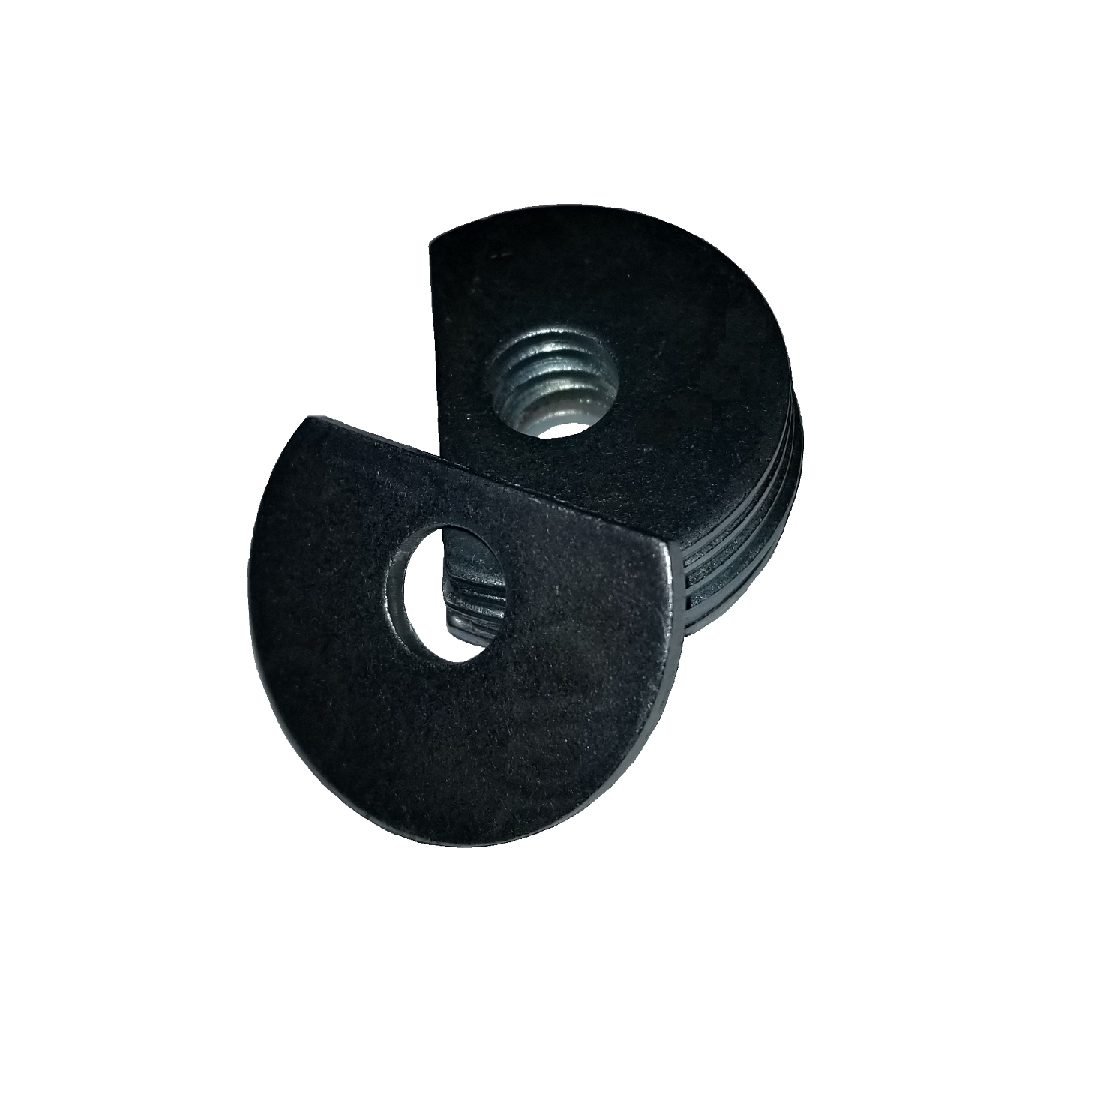 Clipped OD Washer - 0.828 ID, 1.468 OD, 0.134 Thick, Spring Steel - Hard